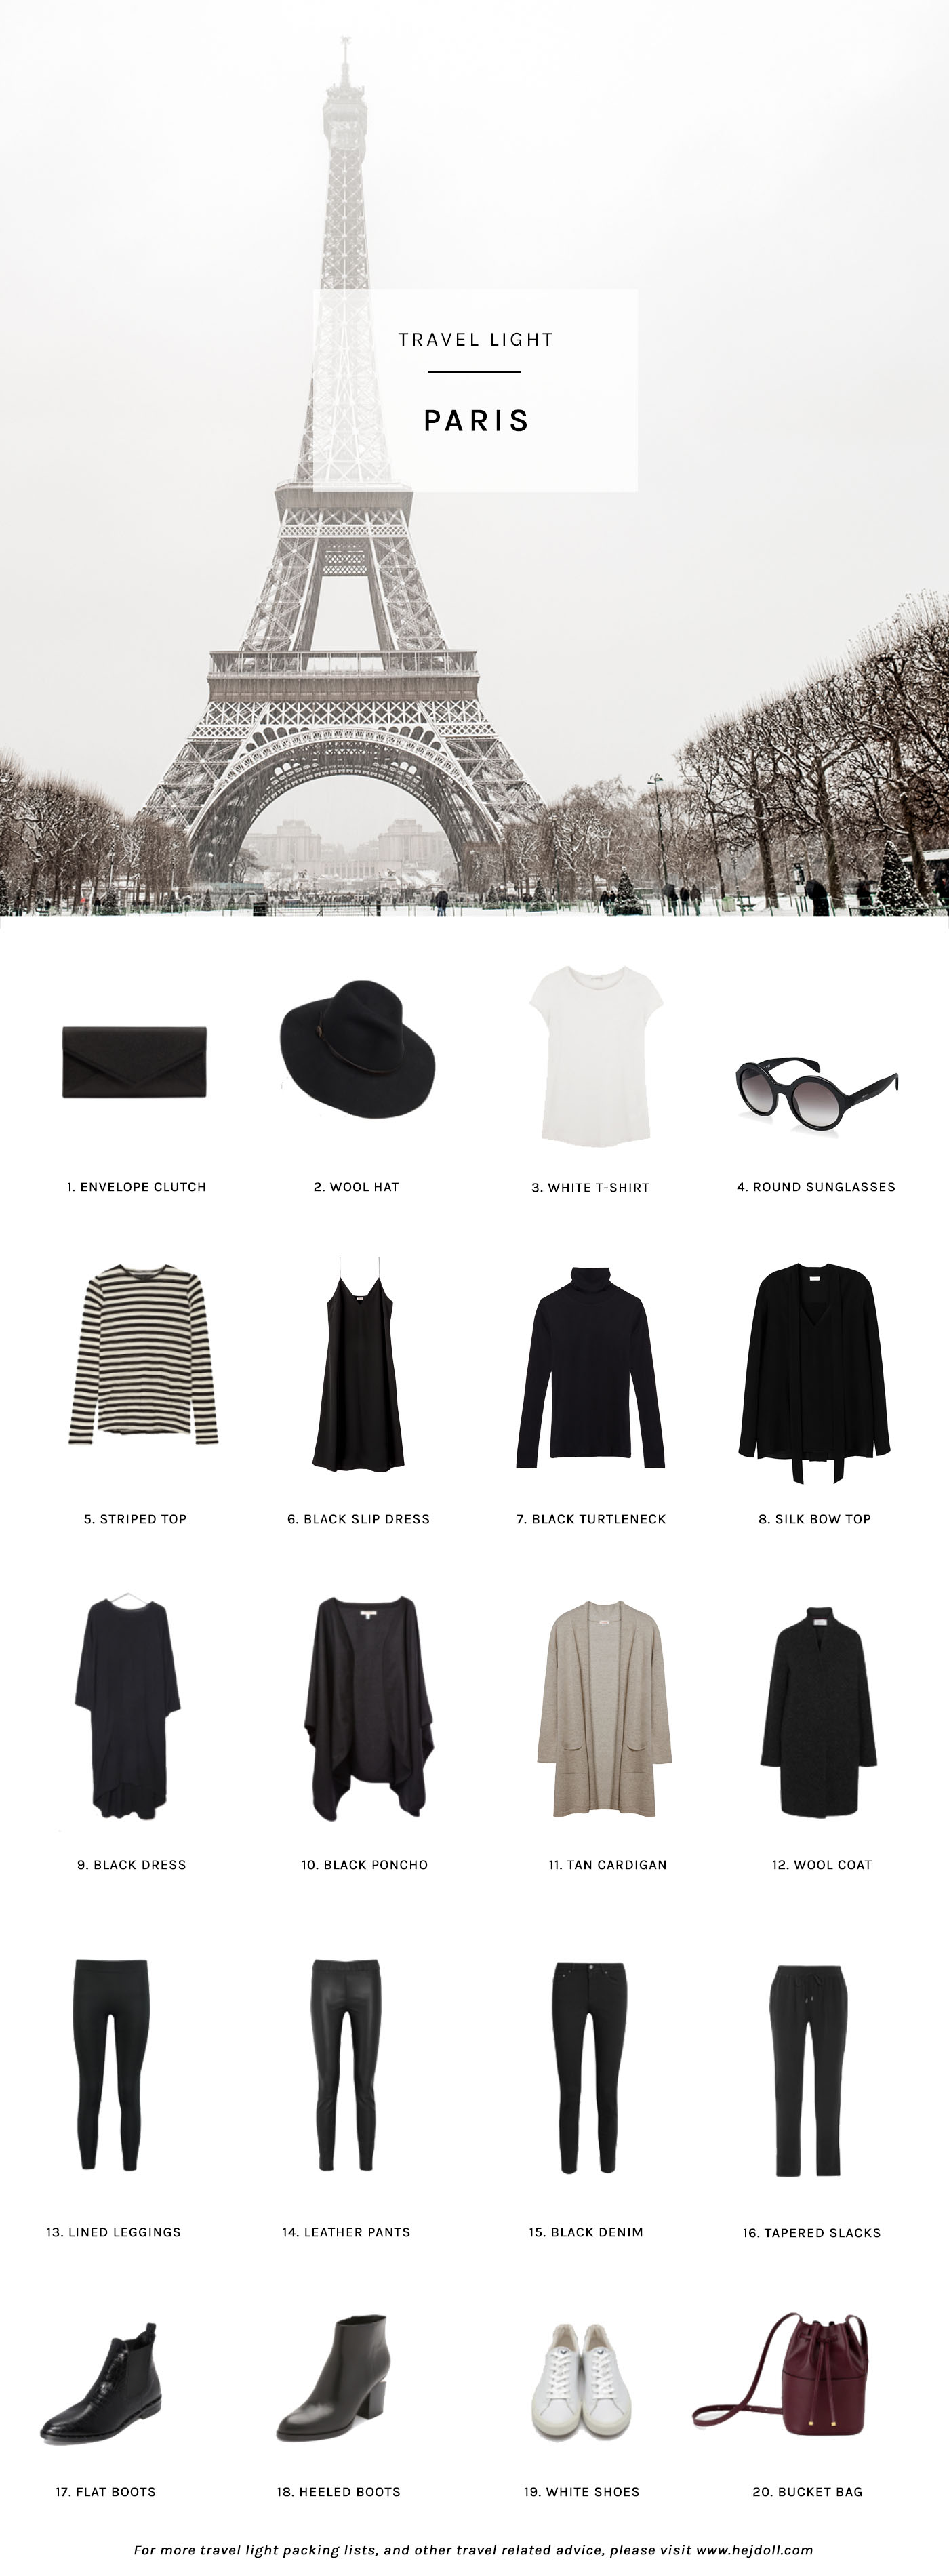 Travel Light - Pack for Winter in Paris. 20 items, 10 outfits, 1 carry-on.